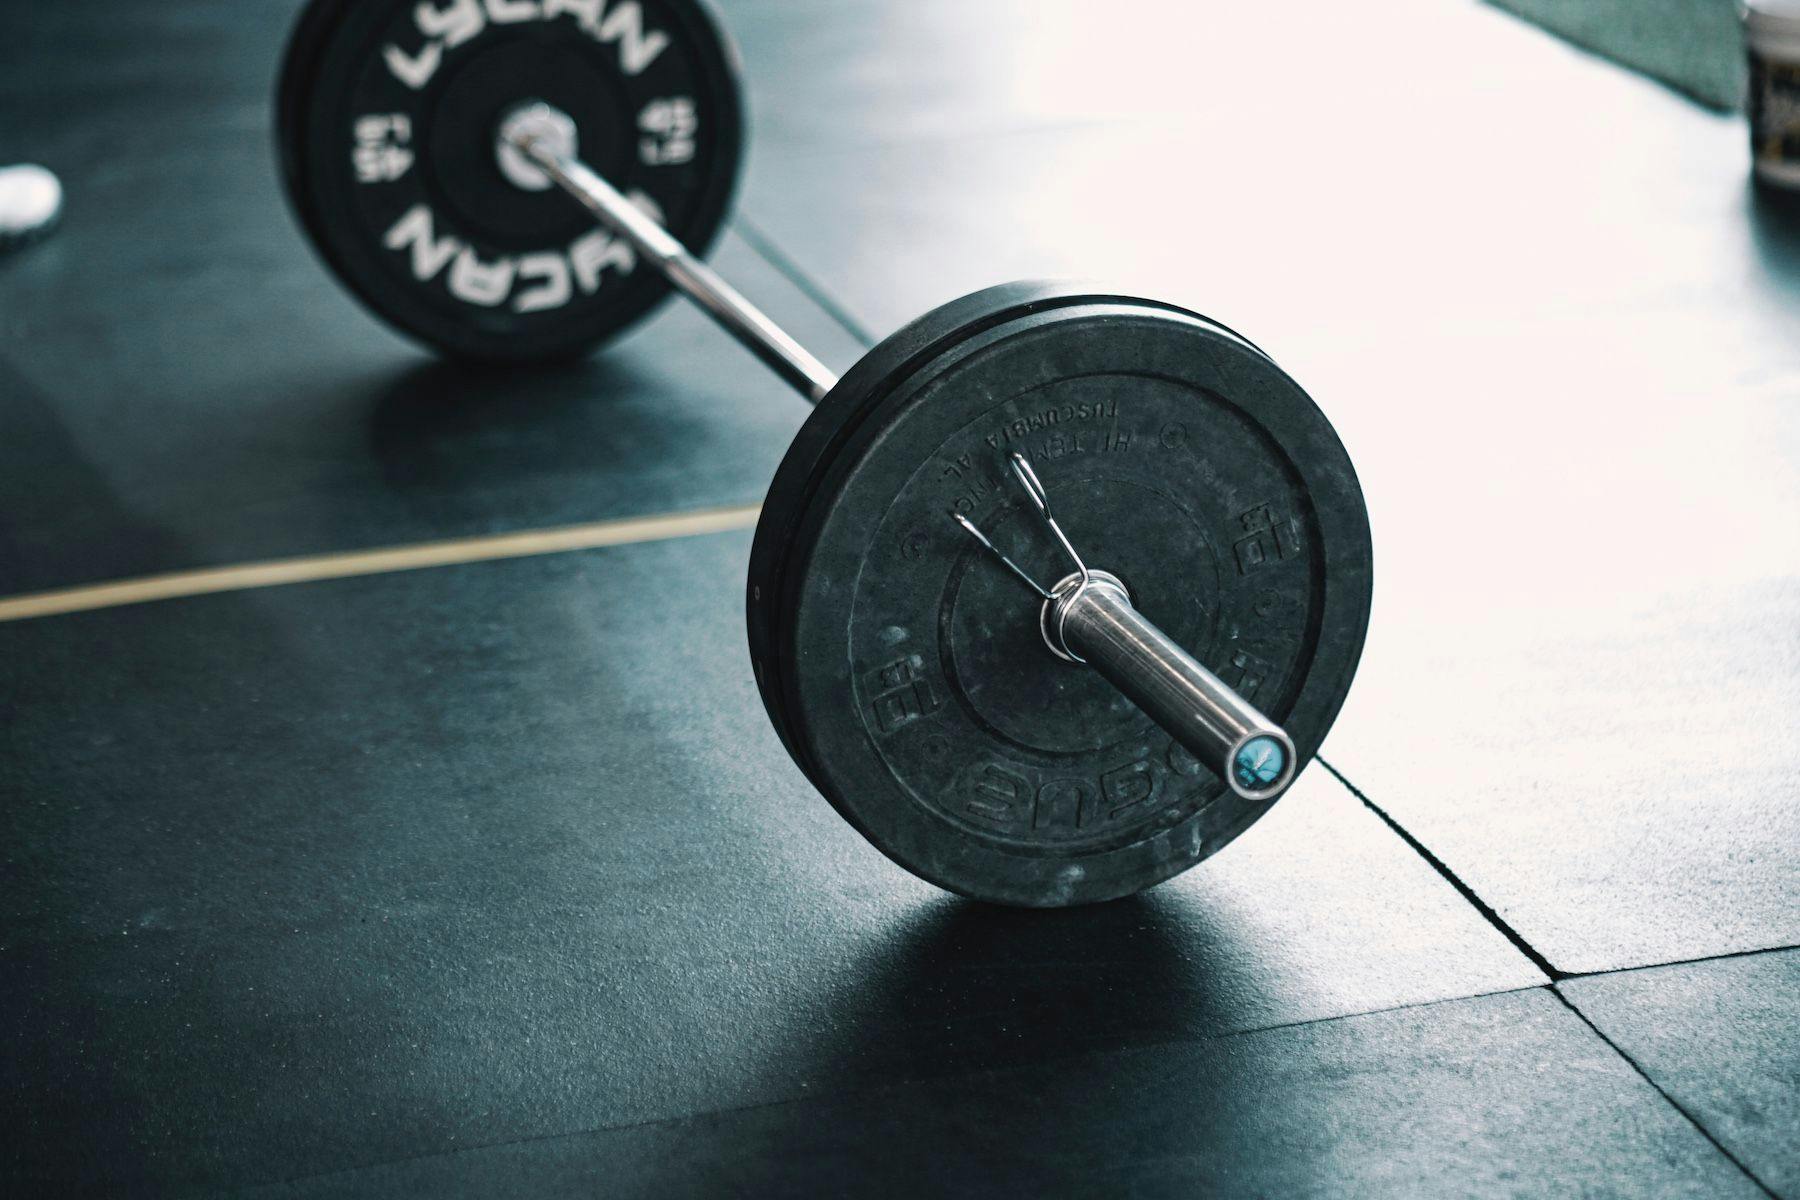 Weightlifting barbell on workout mats